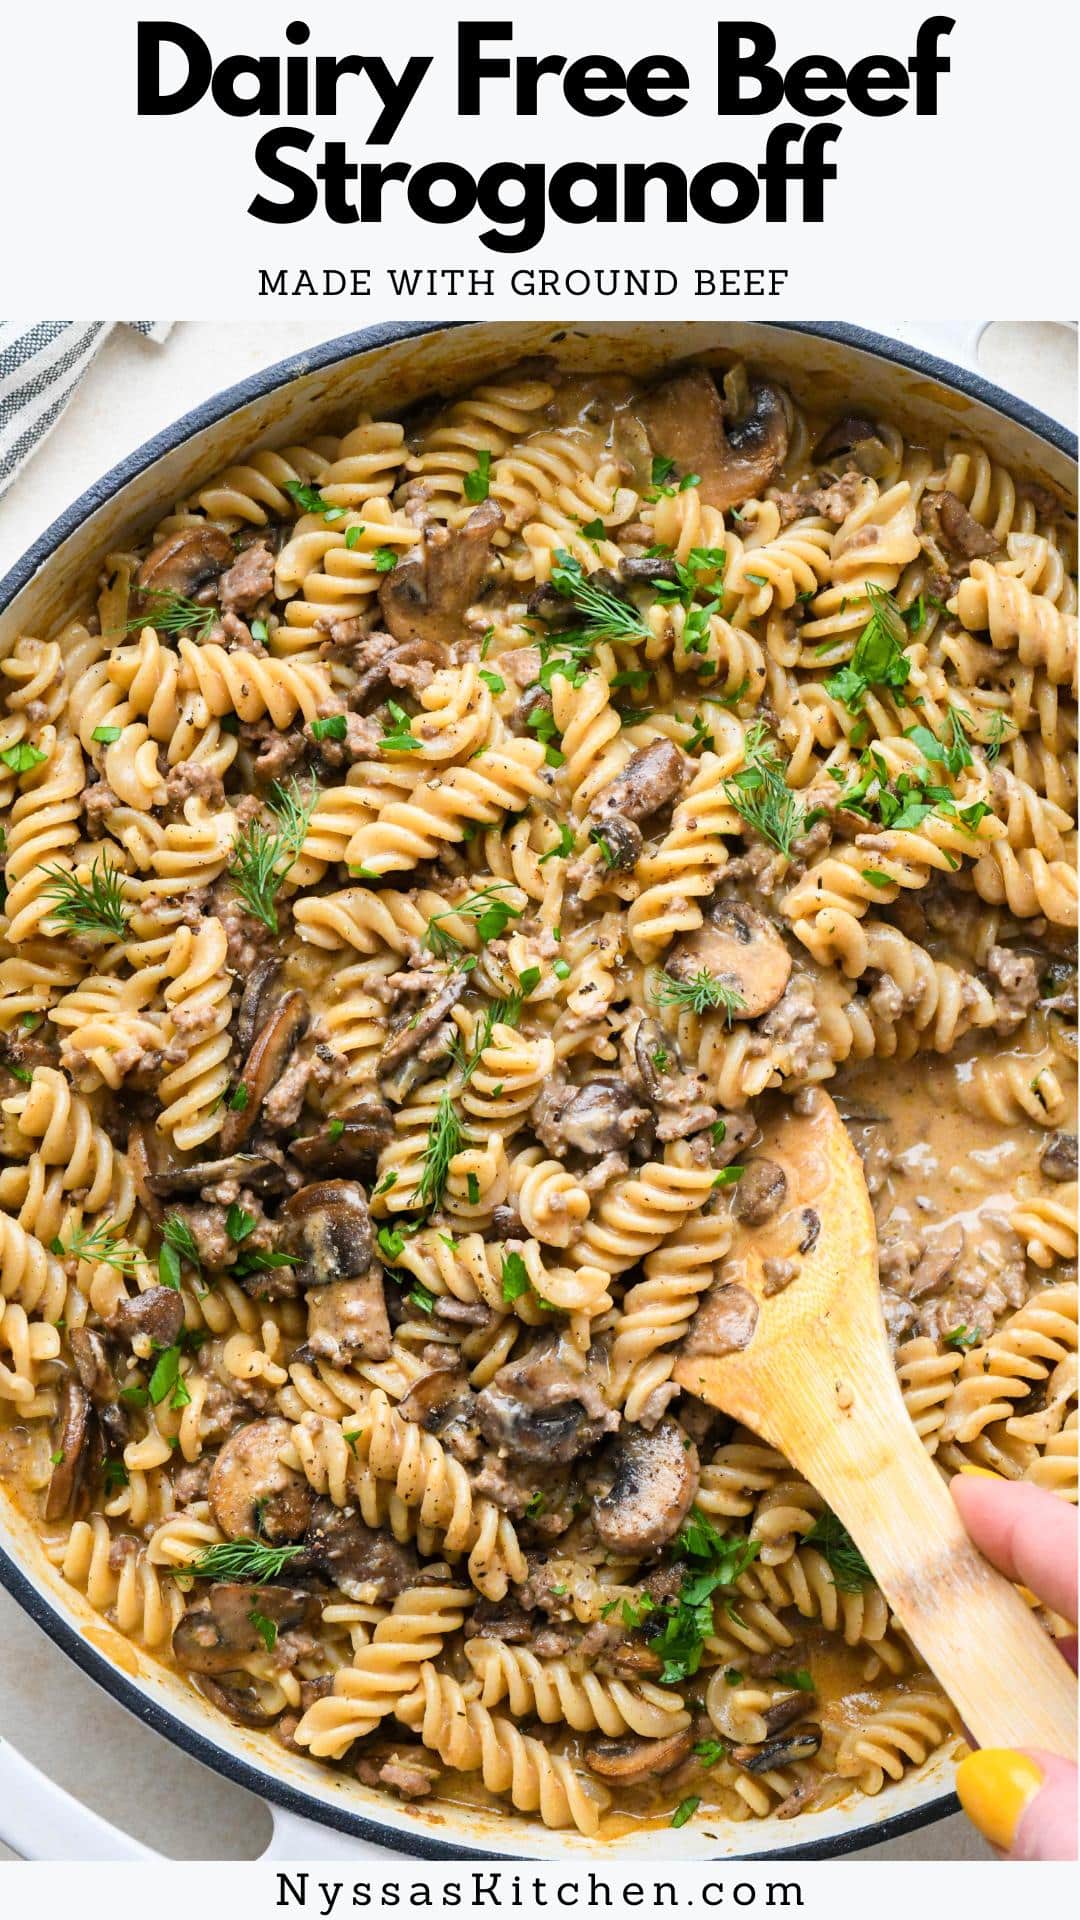 This easy dairy free beef stroganoff is the perfect pasta for the whole family! And because it's made with ground beef it comes together even more quickly than a traditional beef stroganoff recipe. You can have it on the table in less than 45 minutes! It's dairy free, thanks to cashew cream, which replaces sour cream. The recipe includes plenty of mushrooms and a simple blend of spices and flavor-boosting ingredients for lots of rich flavor. Using gluten free pasta also makes the dish gluten free!